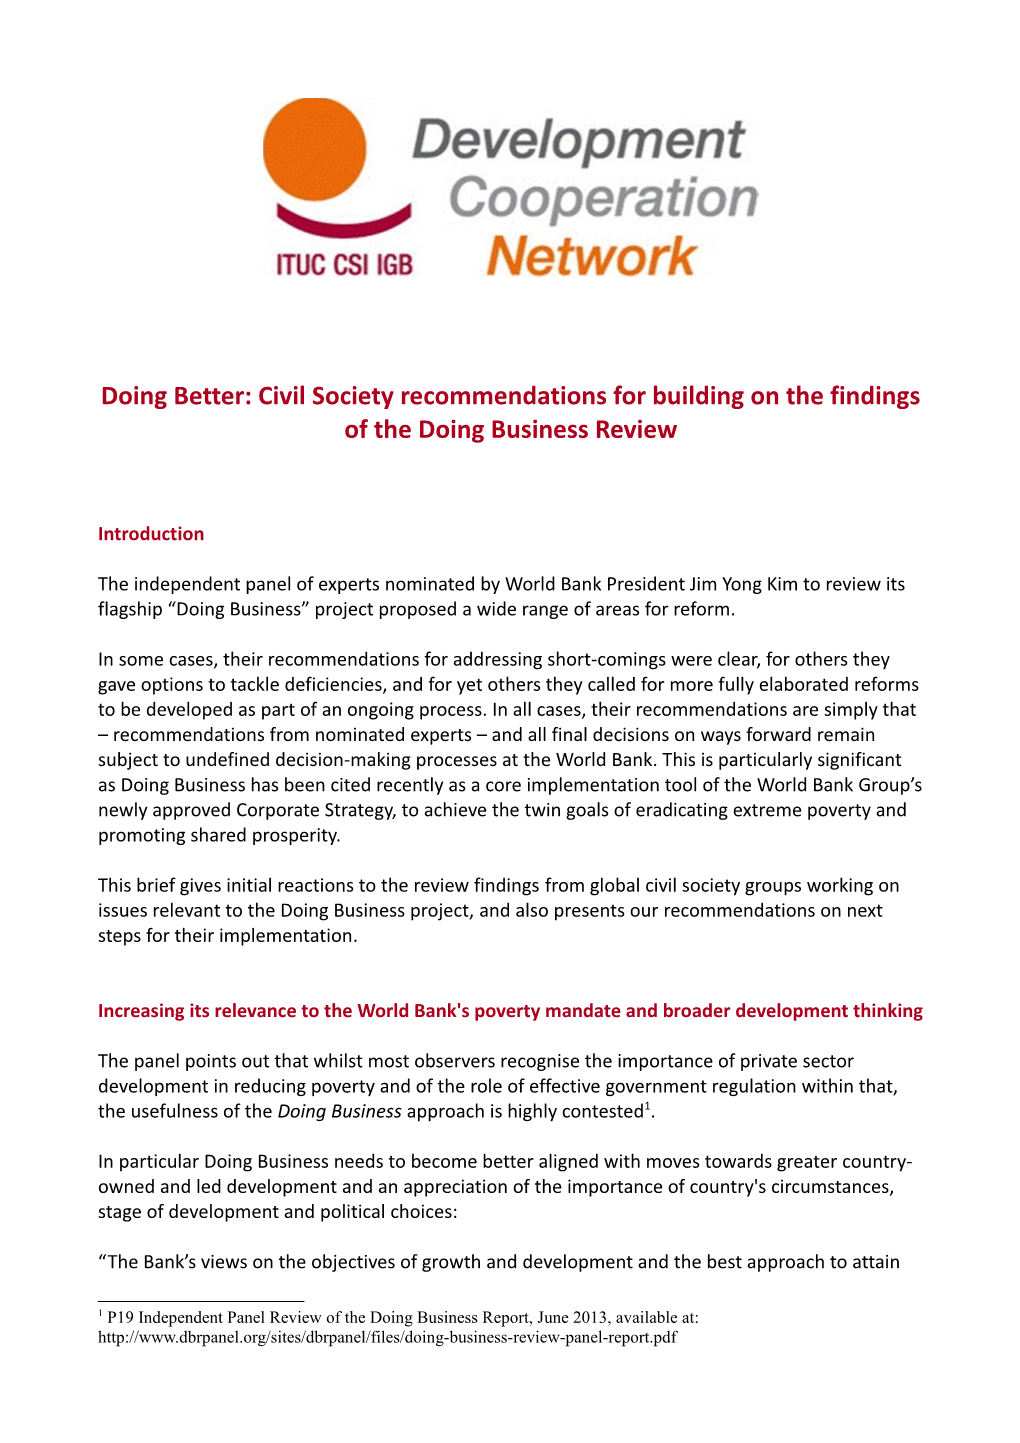 Doing Better: Civil Society Recommendations for Building on the Findings of the Doing